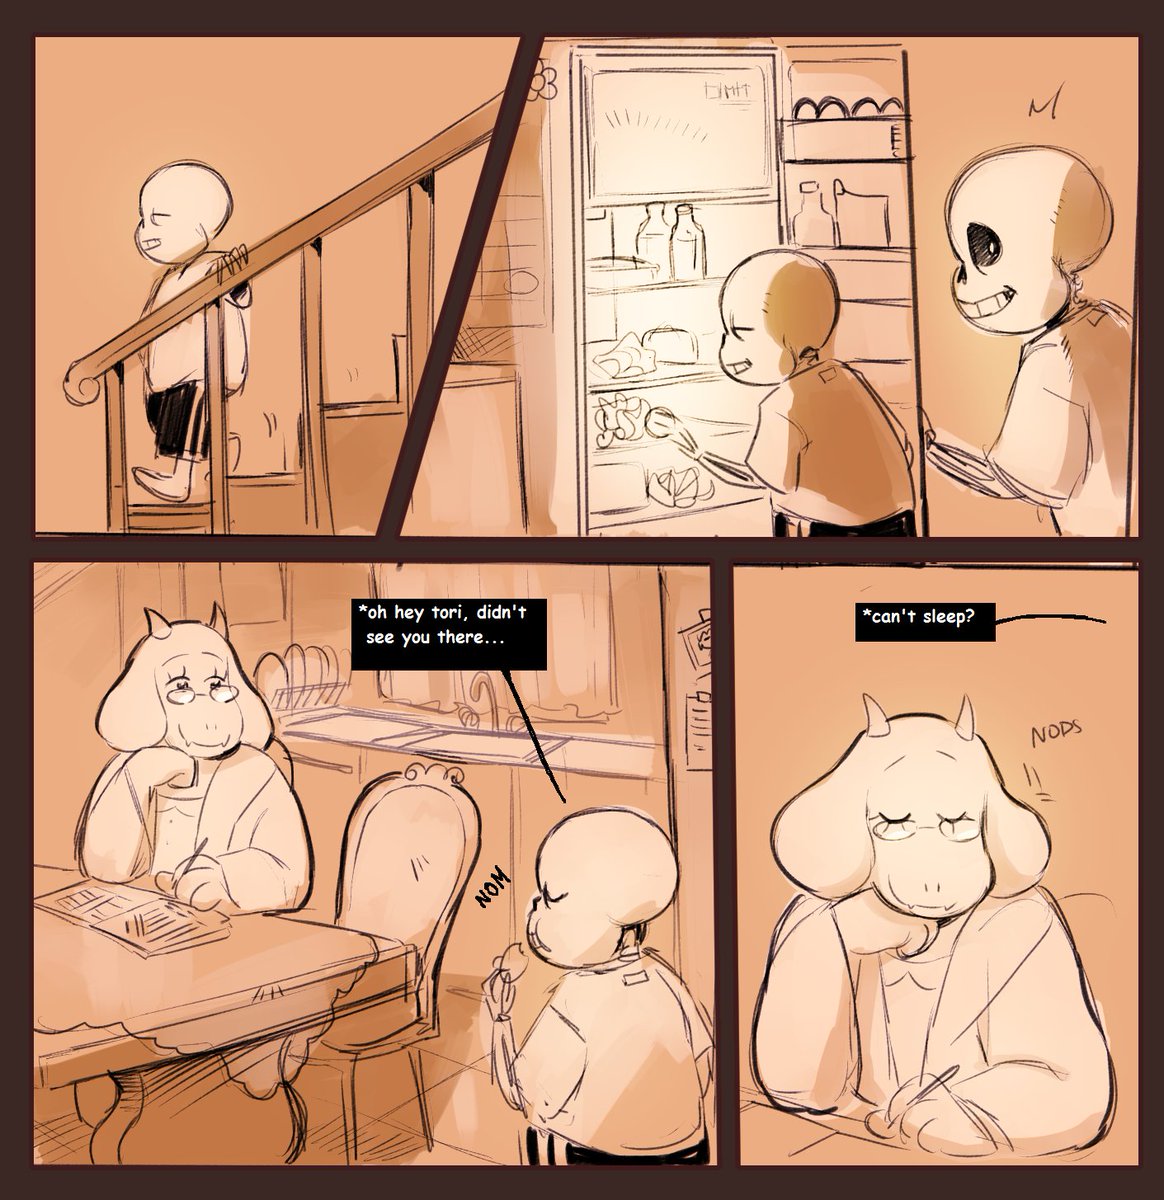 "Old habits die hard"

I think I hadn't put this small Undertale comic here, I drew this some time ago too, but here it goes! 